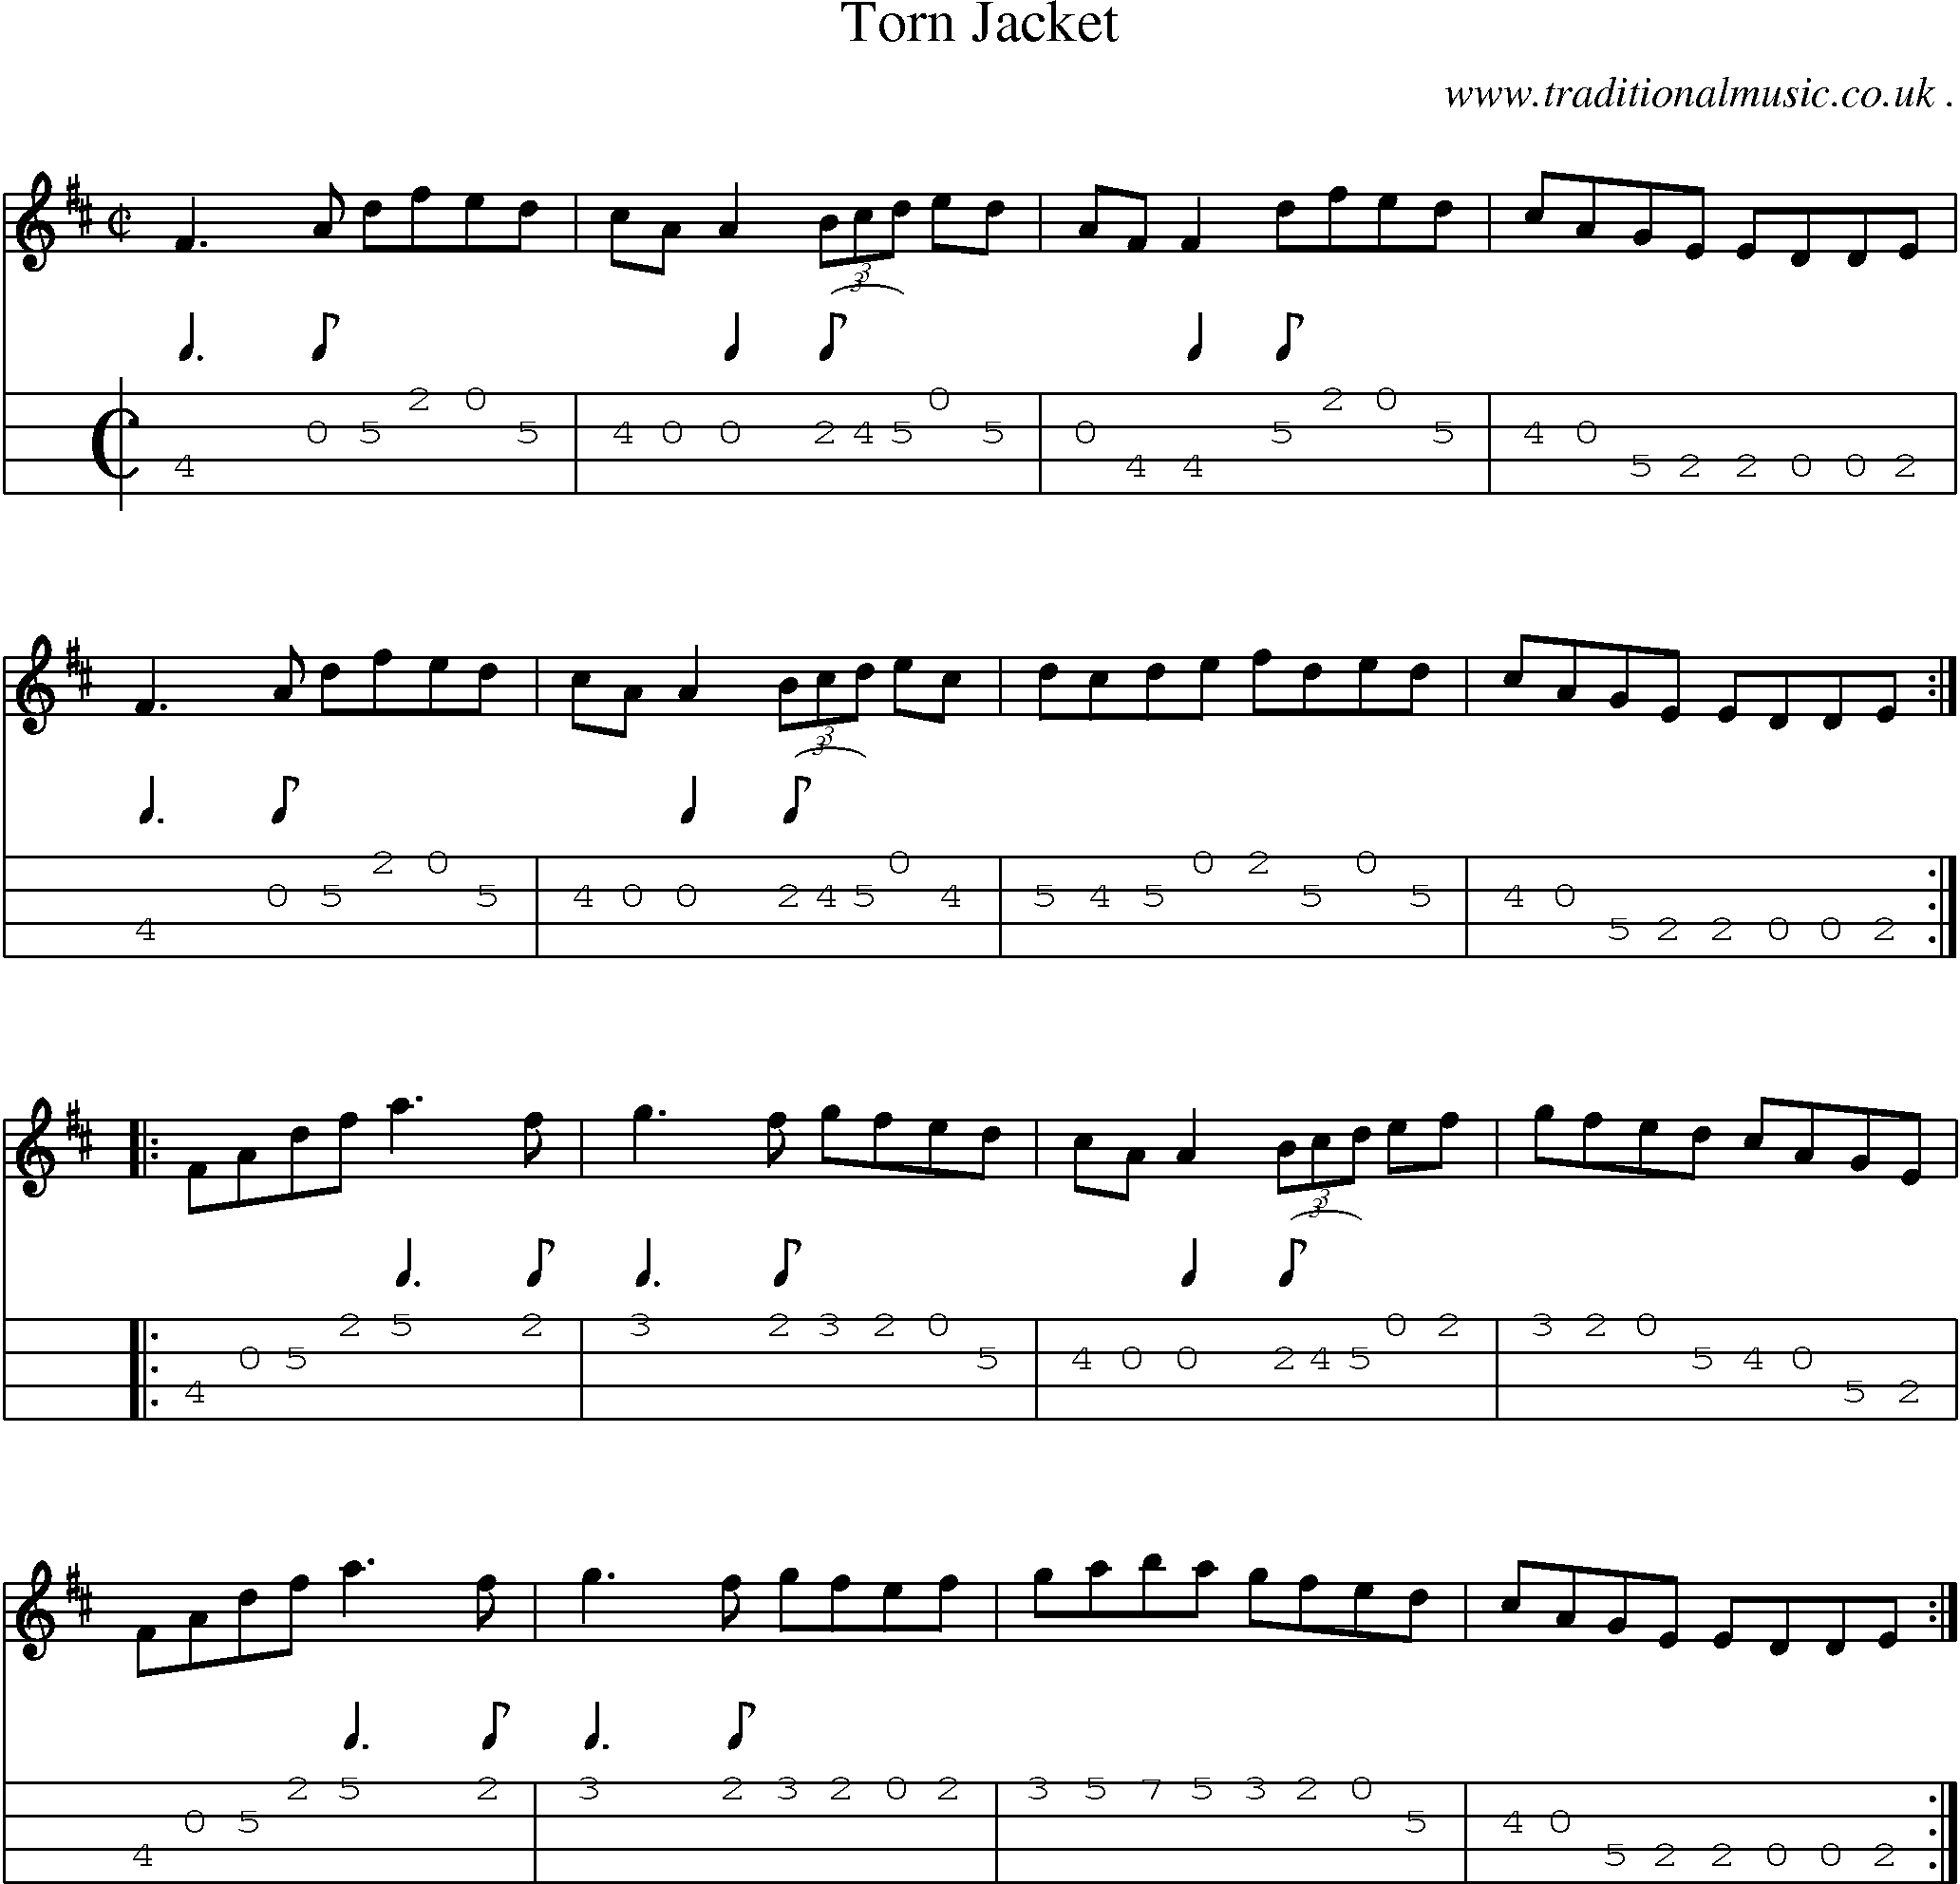 Sheet-Music and Mandolin Tabs for Torn Jacket